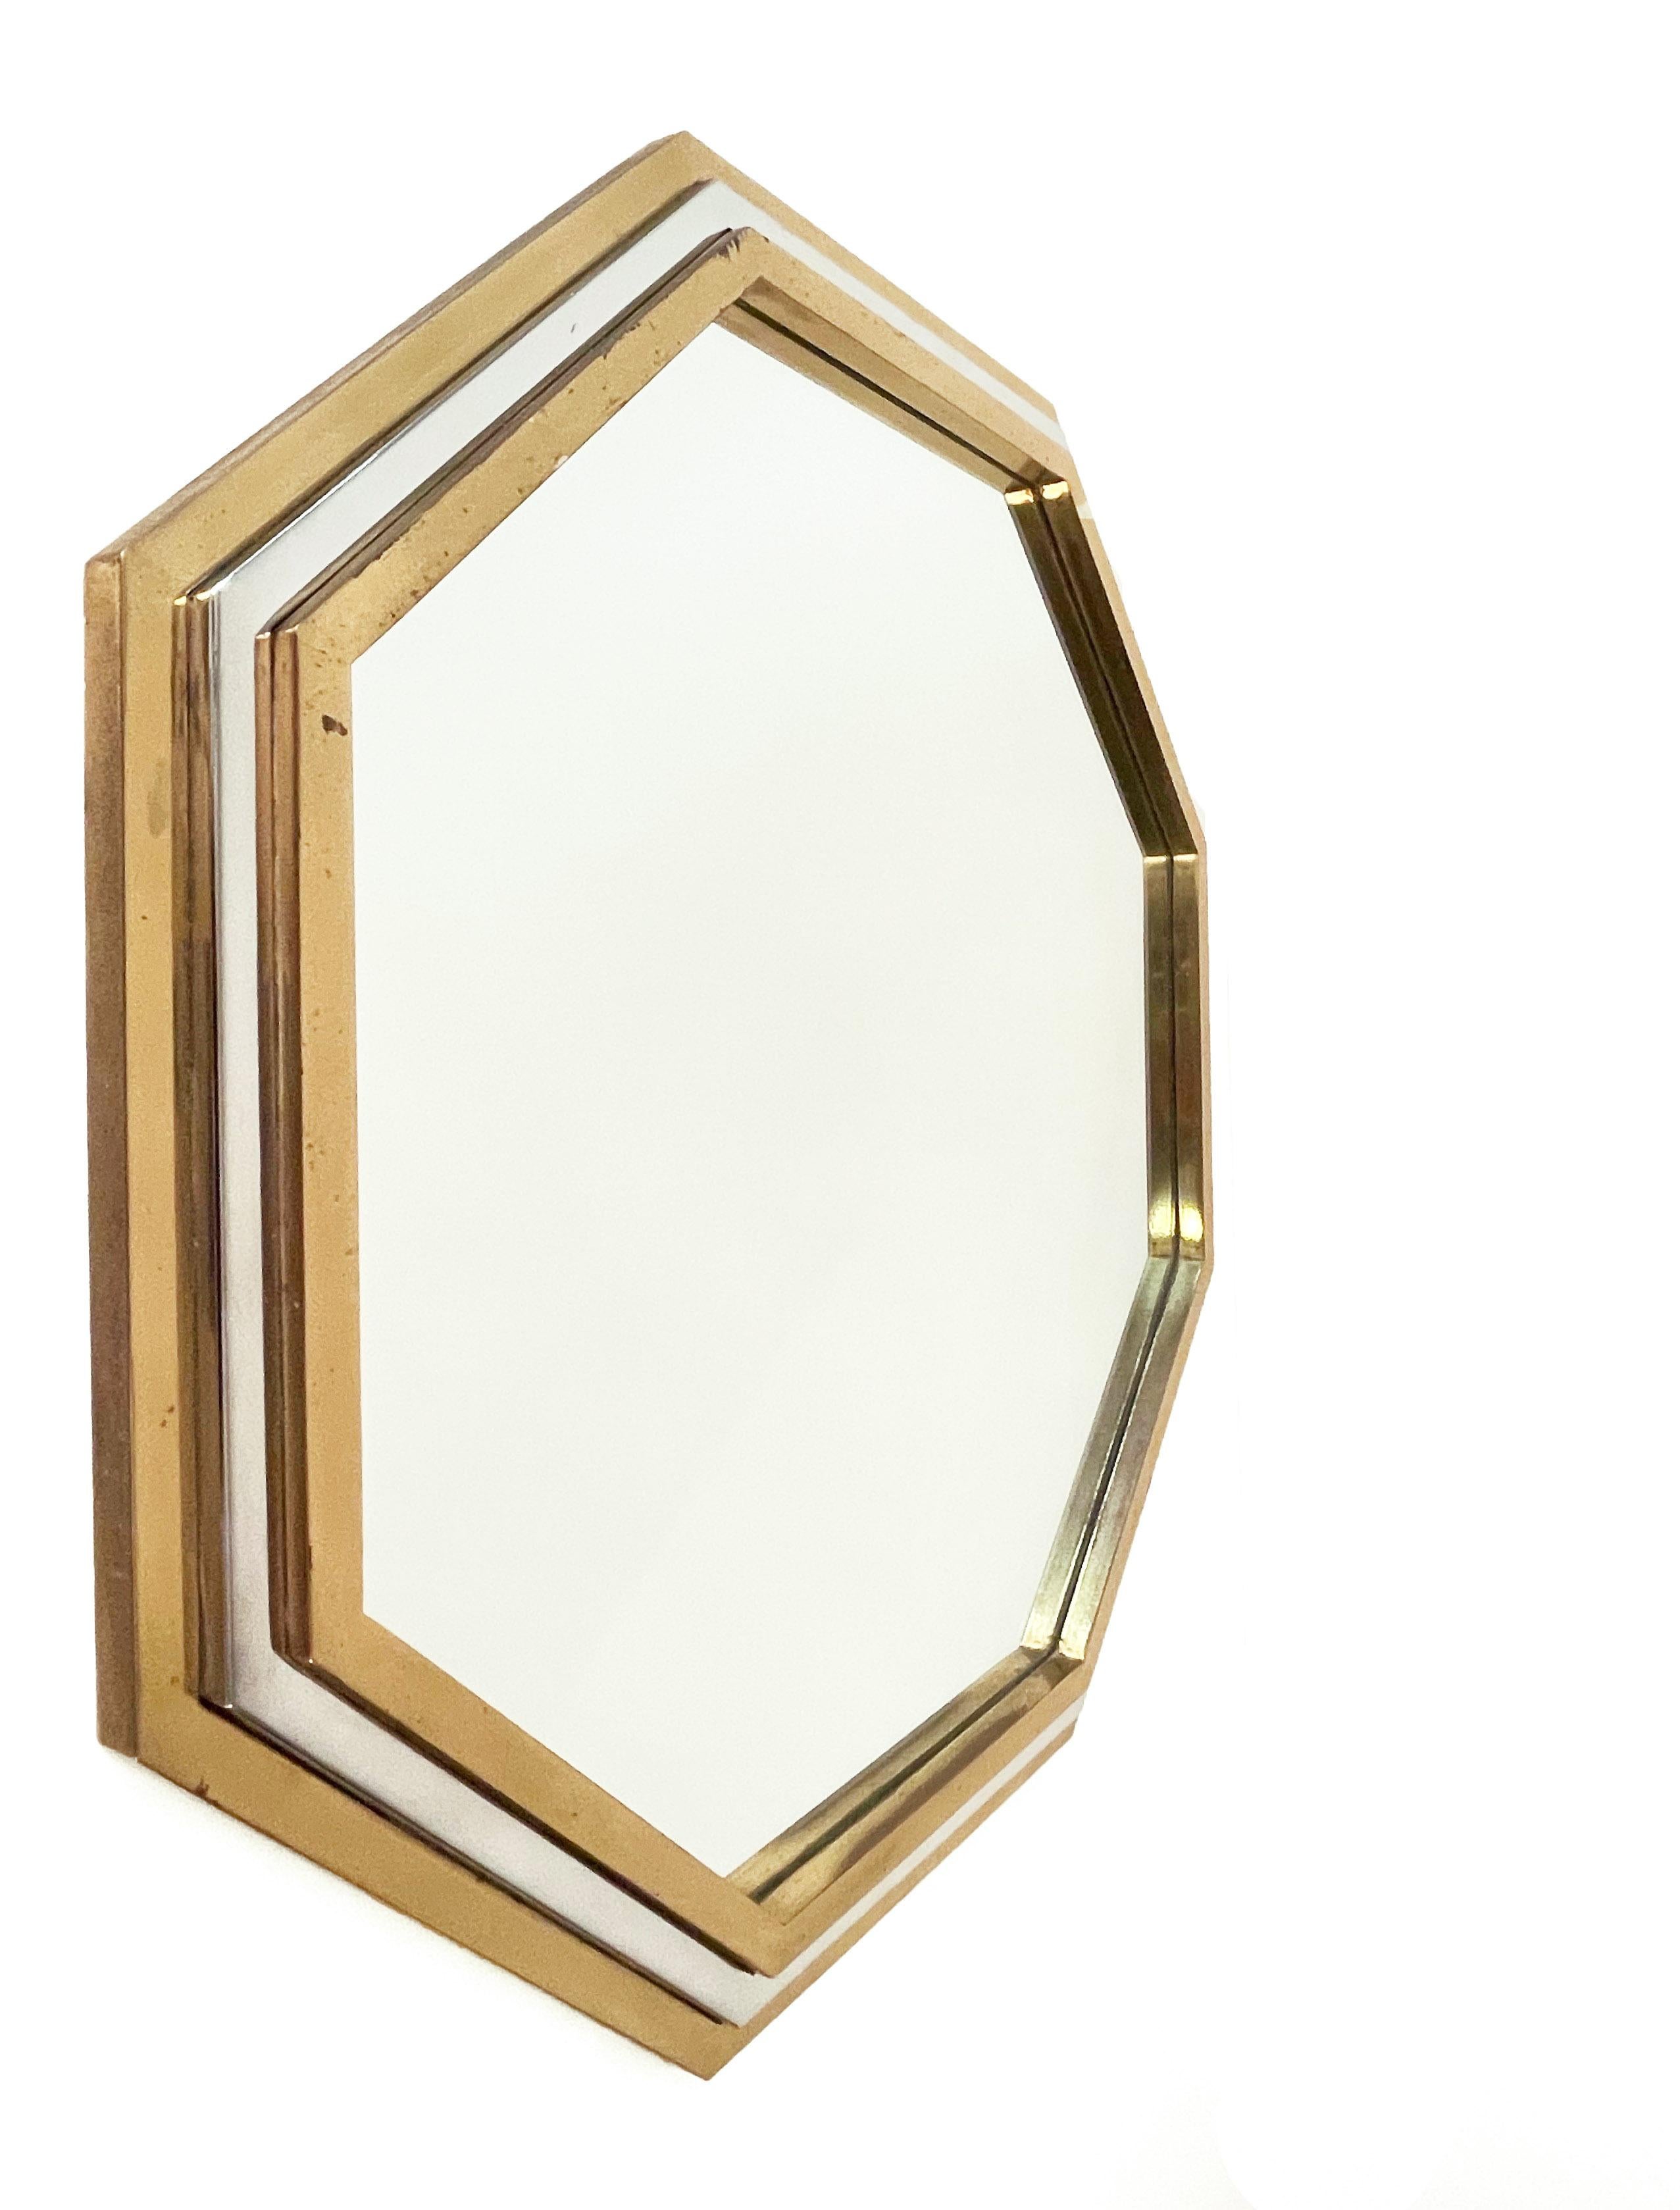 Mid-Century Modern Italian Brass and Chrome Octagonal Wall Mirror Attributed to Willy Rizzo, 1970s